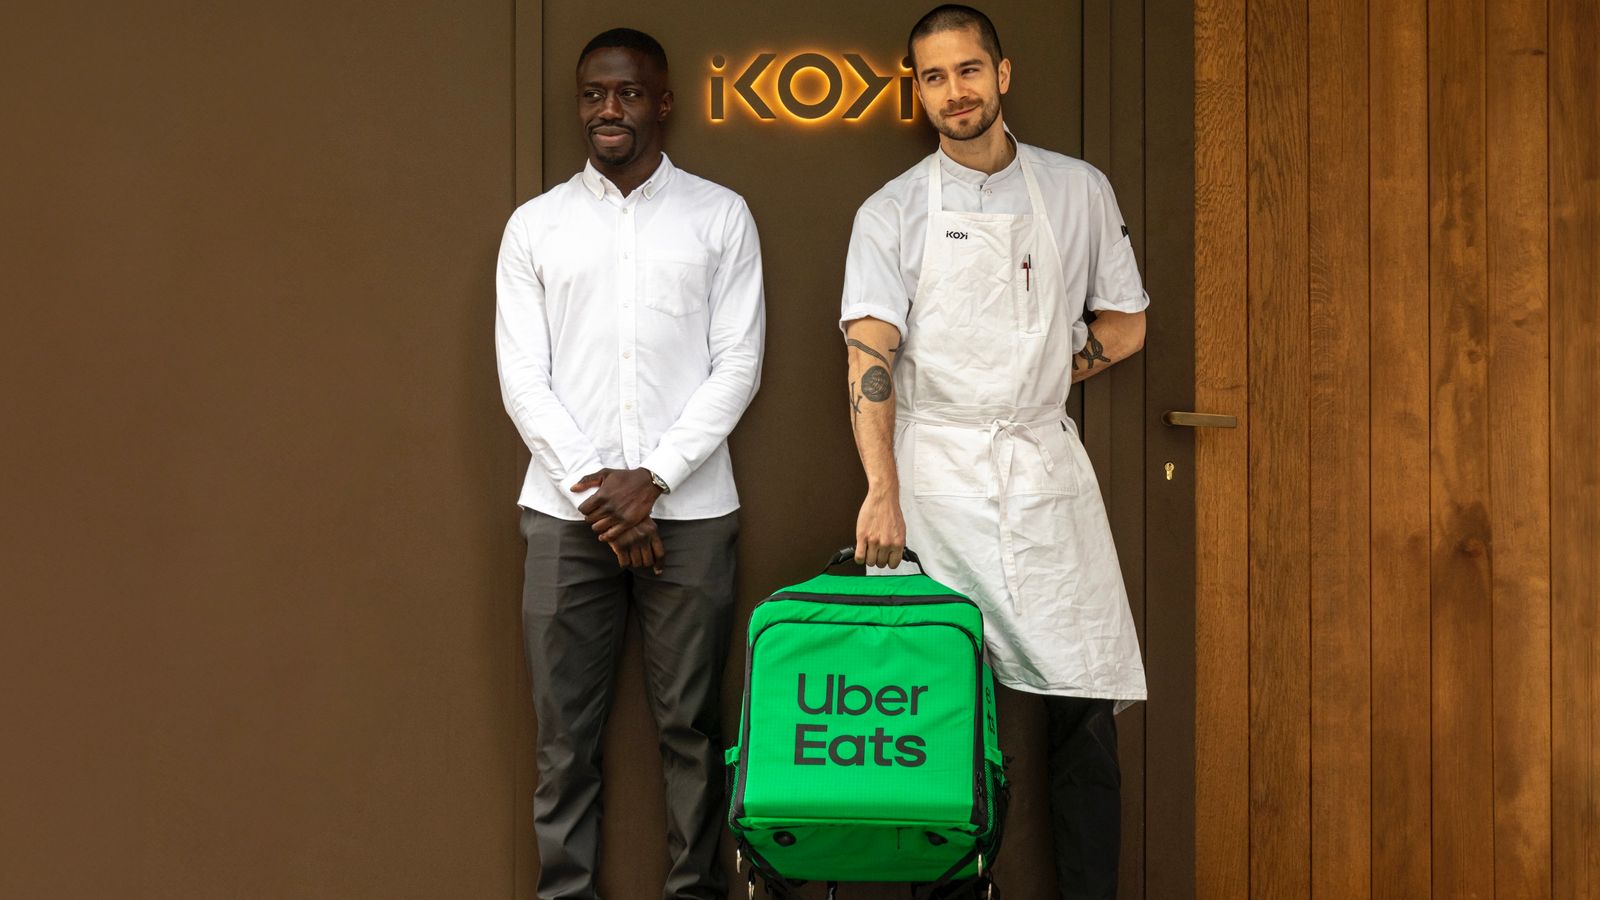 Ikoyi chef justifies £320 tasting menu as he teams up with Uber Eats for 'cheap' delivery option